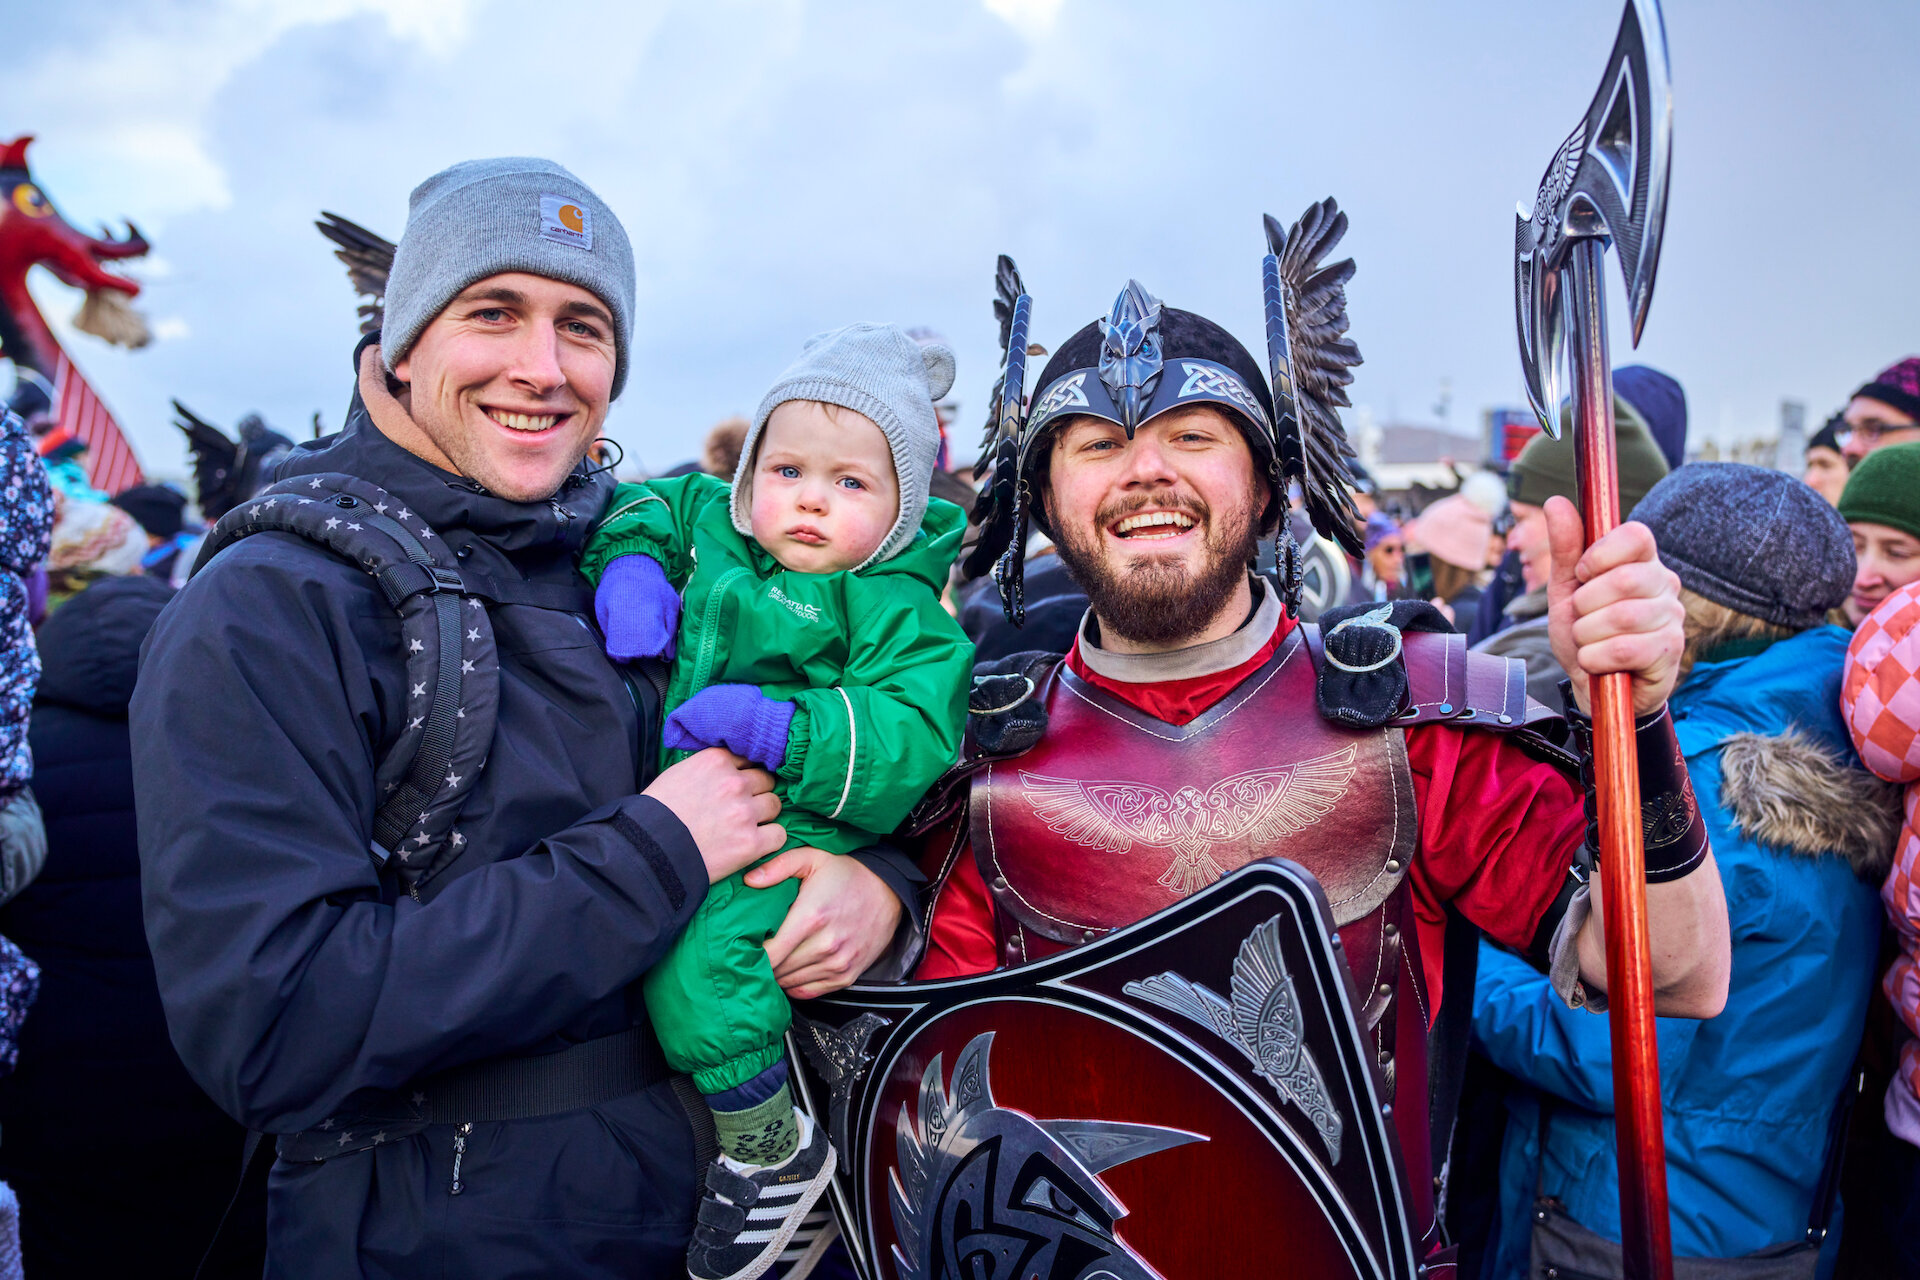 Lerwick Up Helly Aa, returning for the first time since 2020, drew out spectators of all ages. Photo: Euan Myles/Promote Shetland.